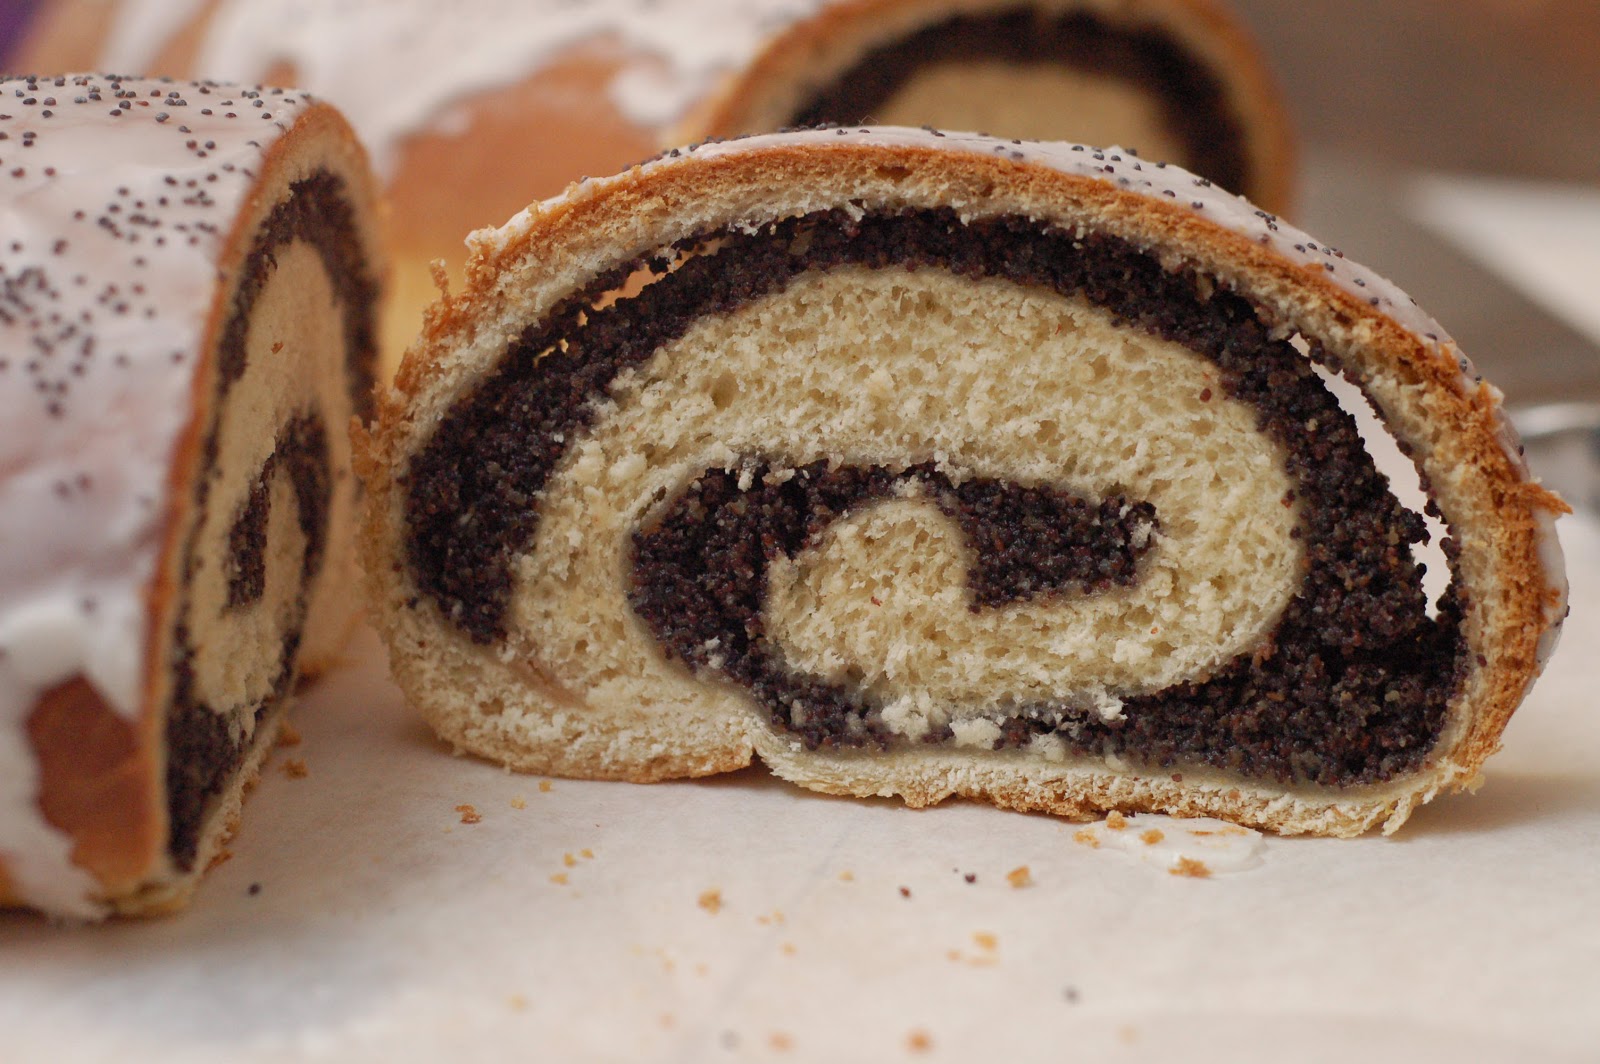 how to eat properly: makowiec (polish poppy seed roll)